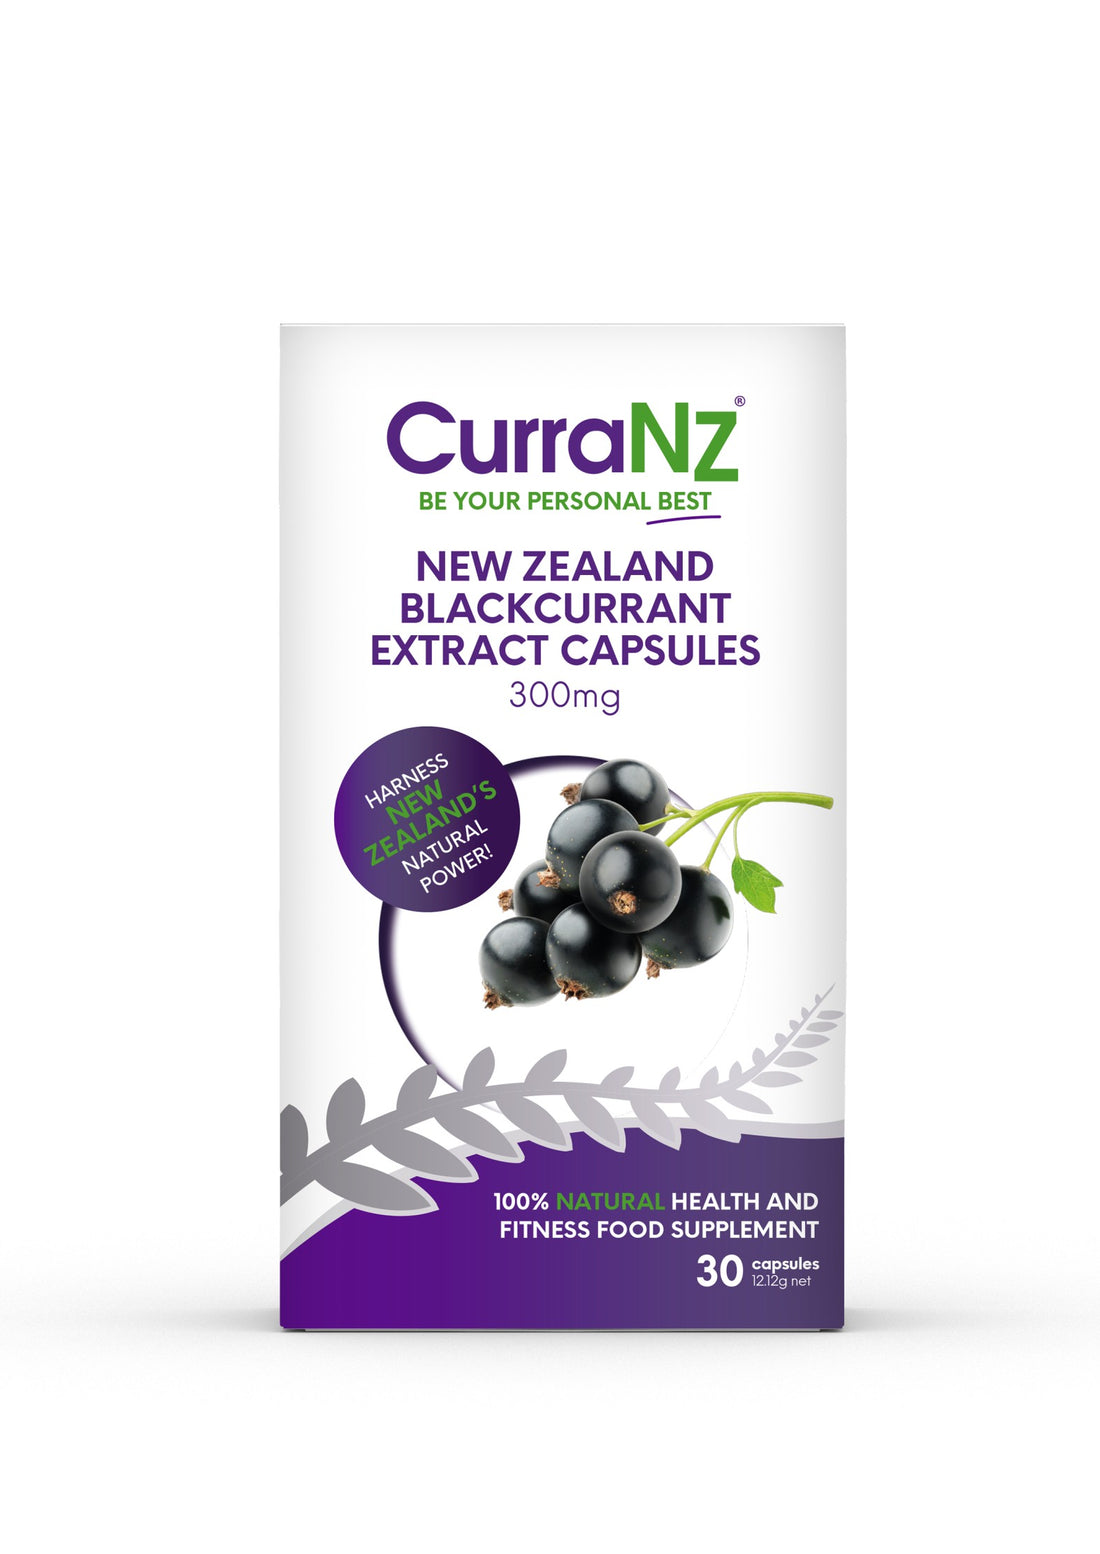 'Grand Slam' champion CurraNZ is amongst the best supplements around